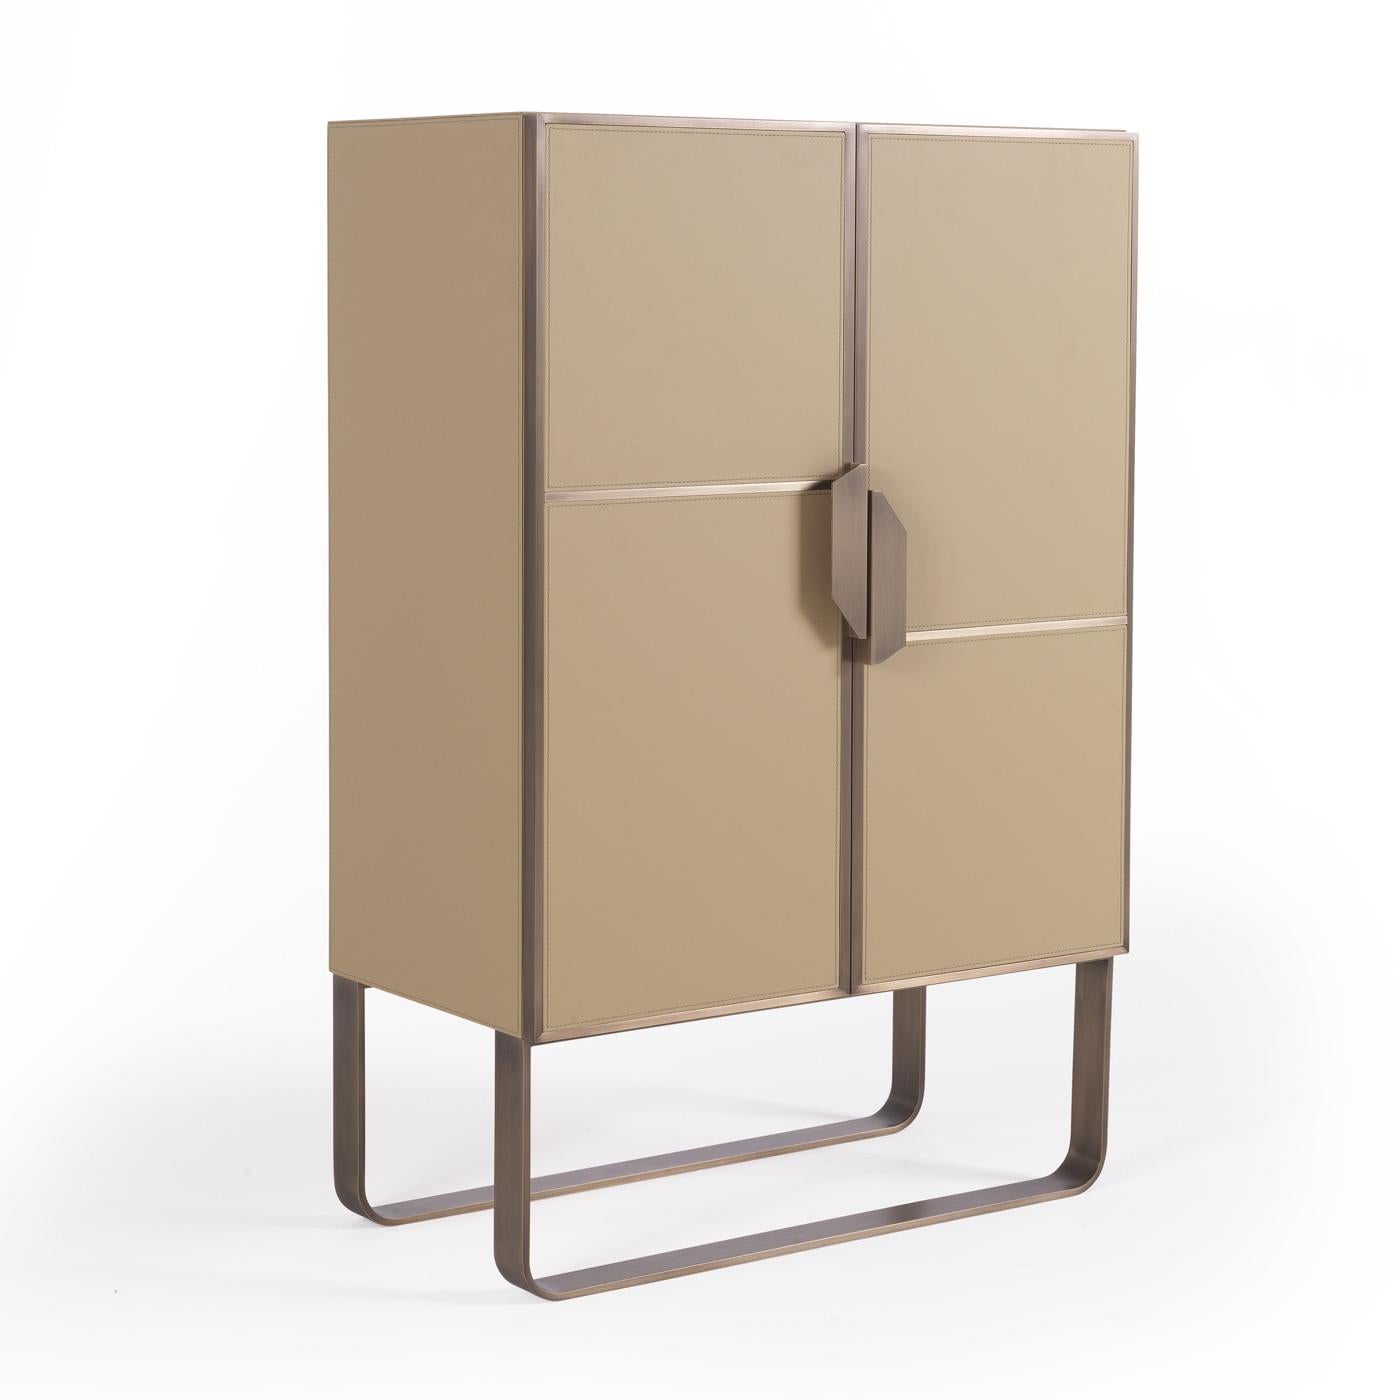 An accent of sophistication to any modern or Classic decor, this stunning cabinet bar features a simple design enhanced by refined materials. The door panels are entirely covered in soft beige leather with brushed metal details that recall the